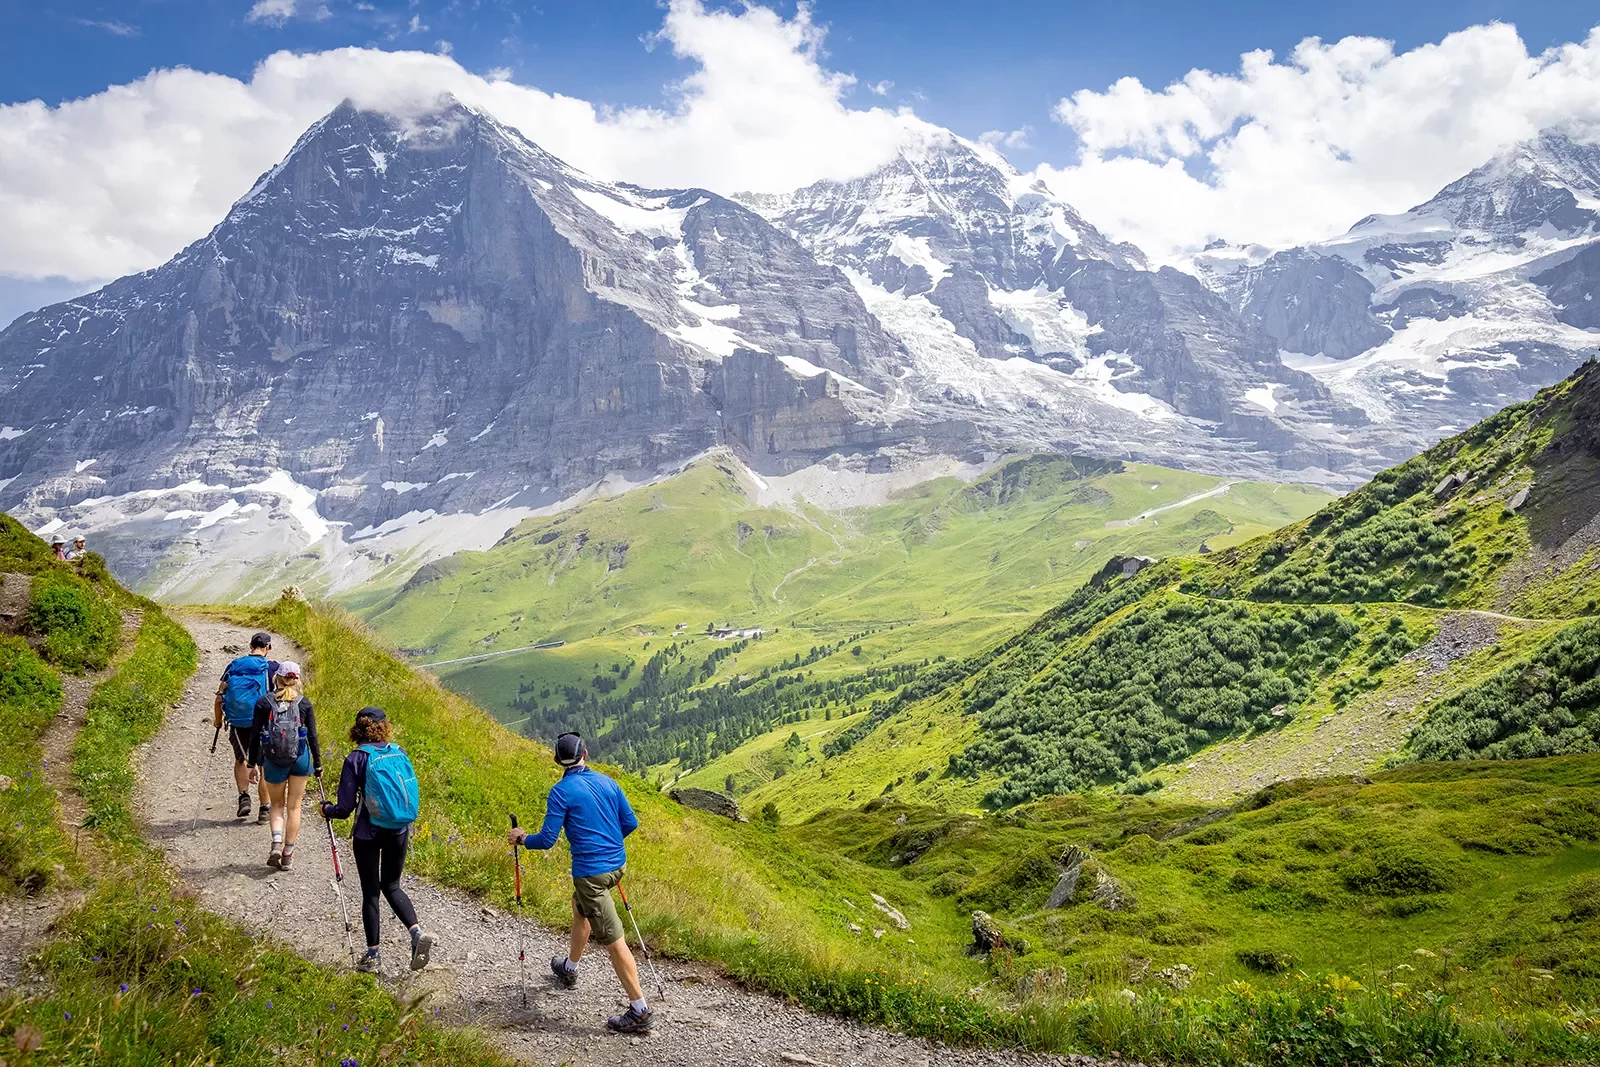 Four guests hiking on grassy road, Mount Eiger in background.